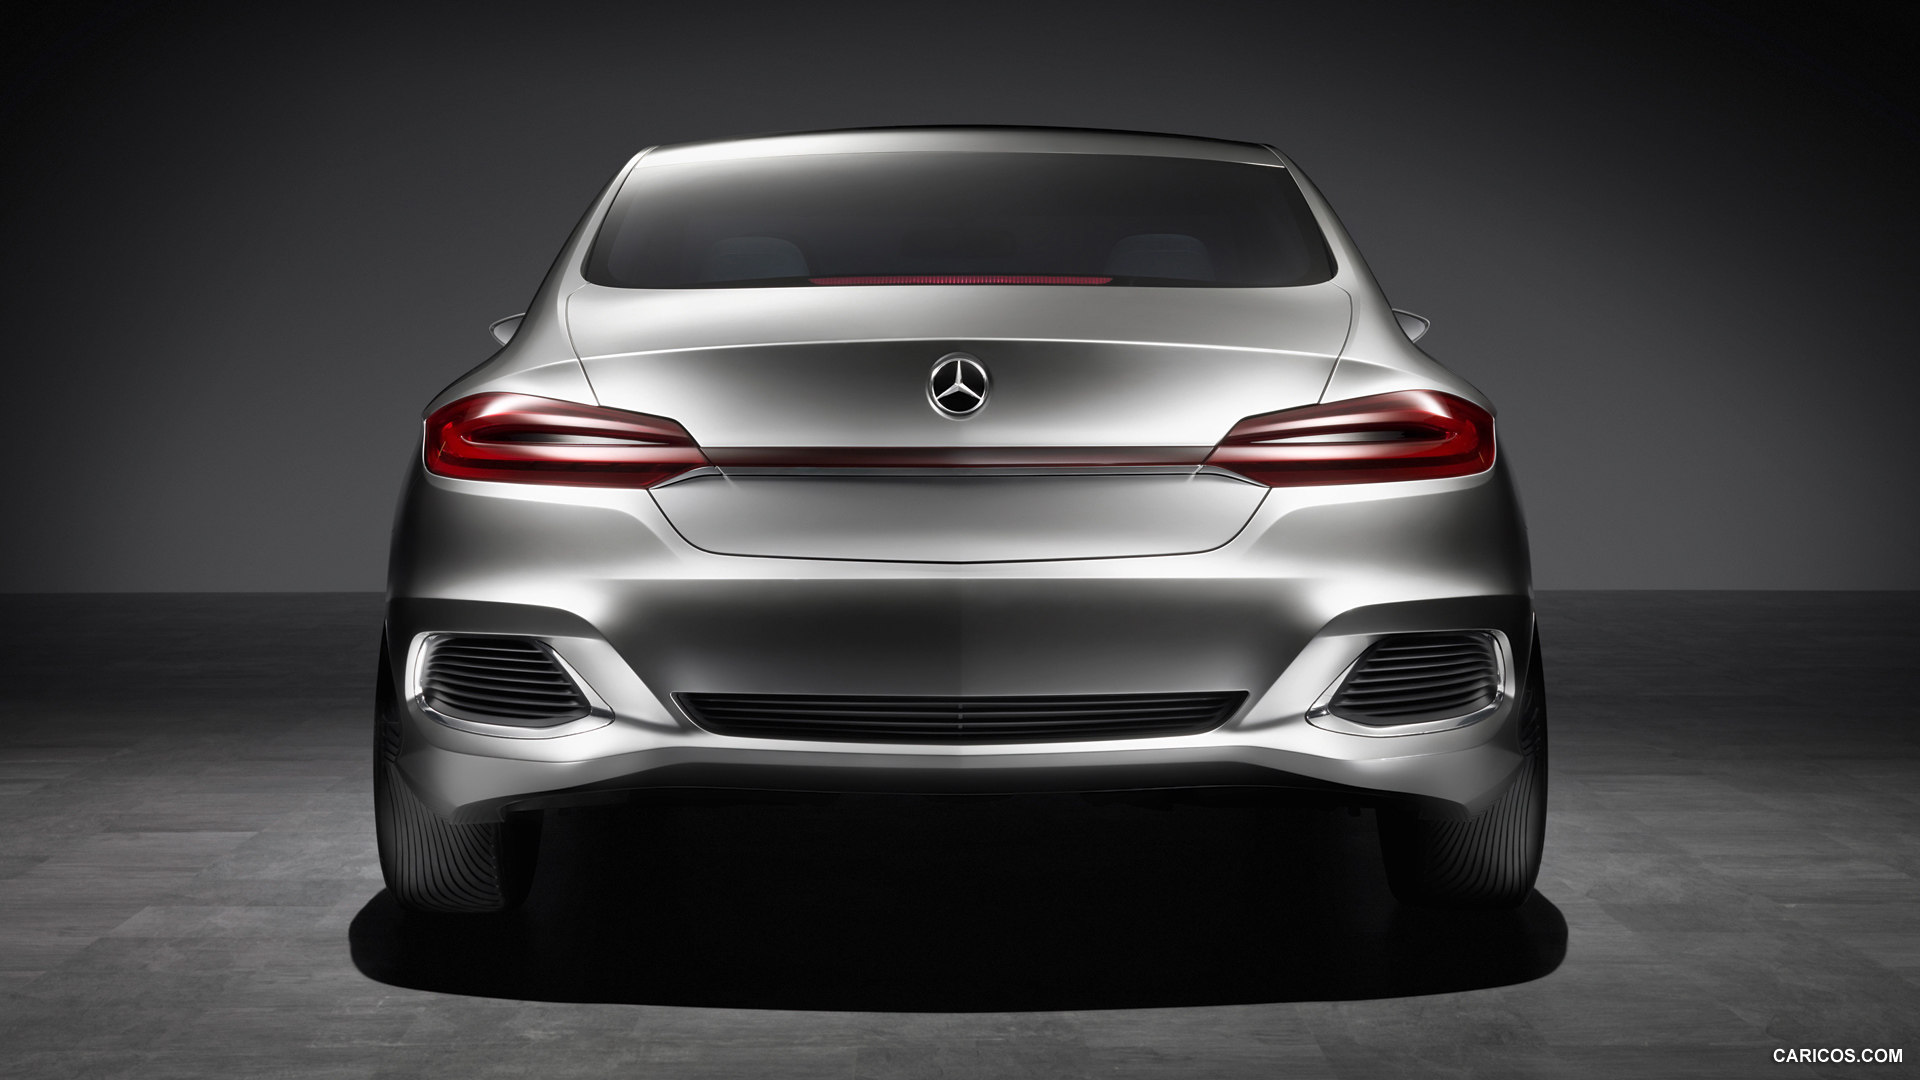 Mercedes-Benz F800 Style Concept (2010)  - Rear Angle , #66 of 120